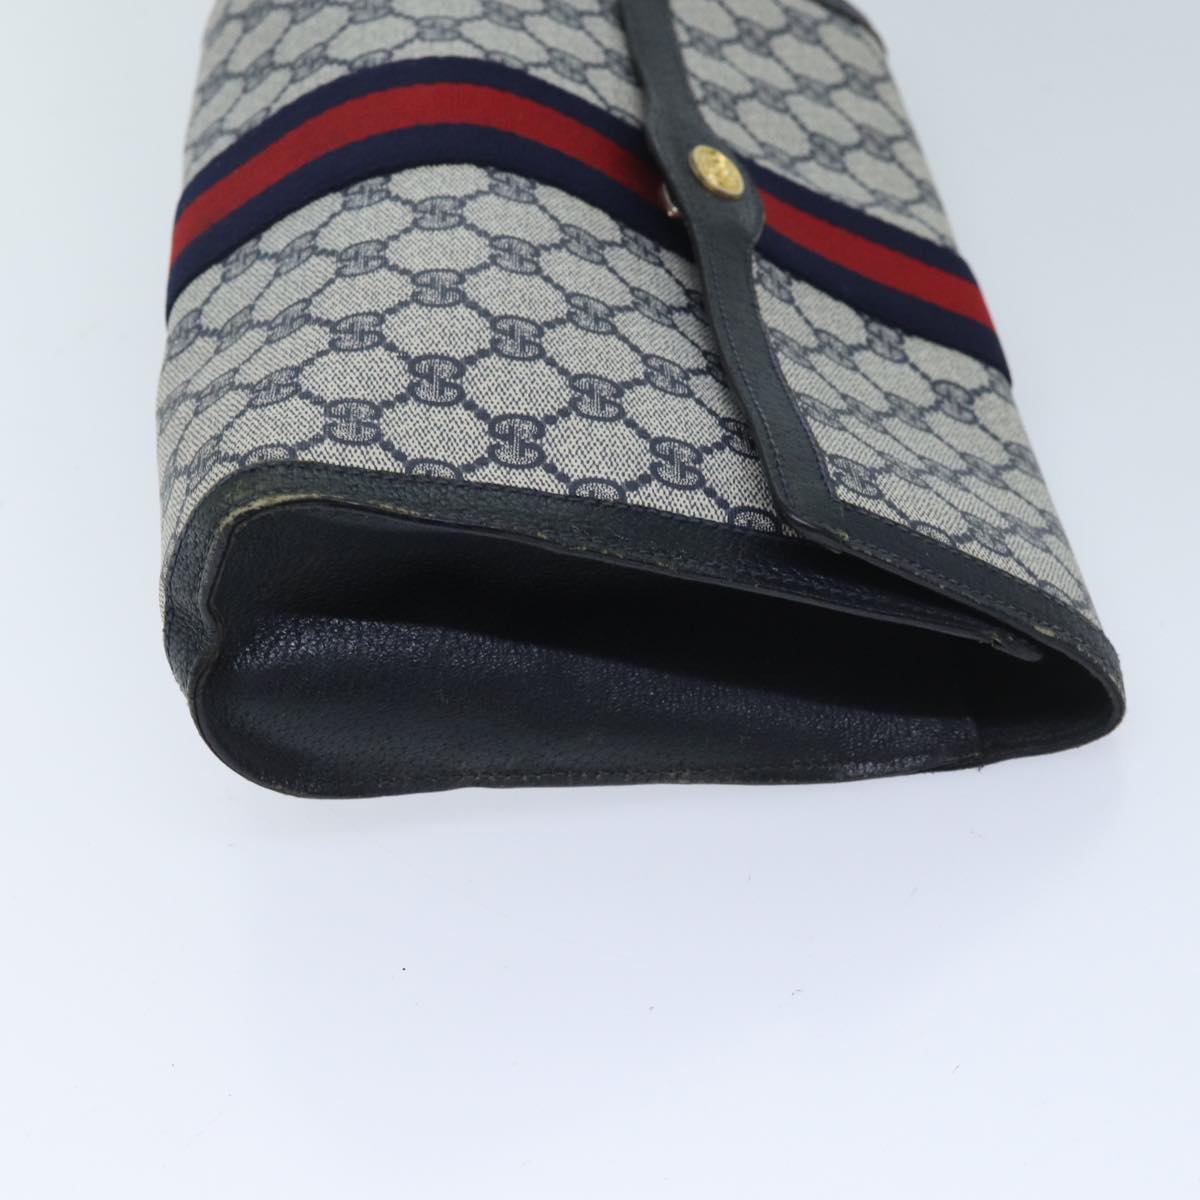 GUCCI GG Supreme Sherry Line Clutch Bag PVC Navy Red 89 01 007 Auth yk11471